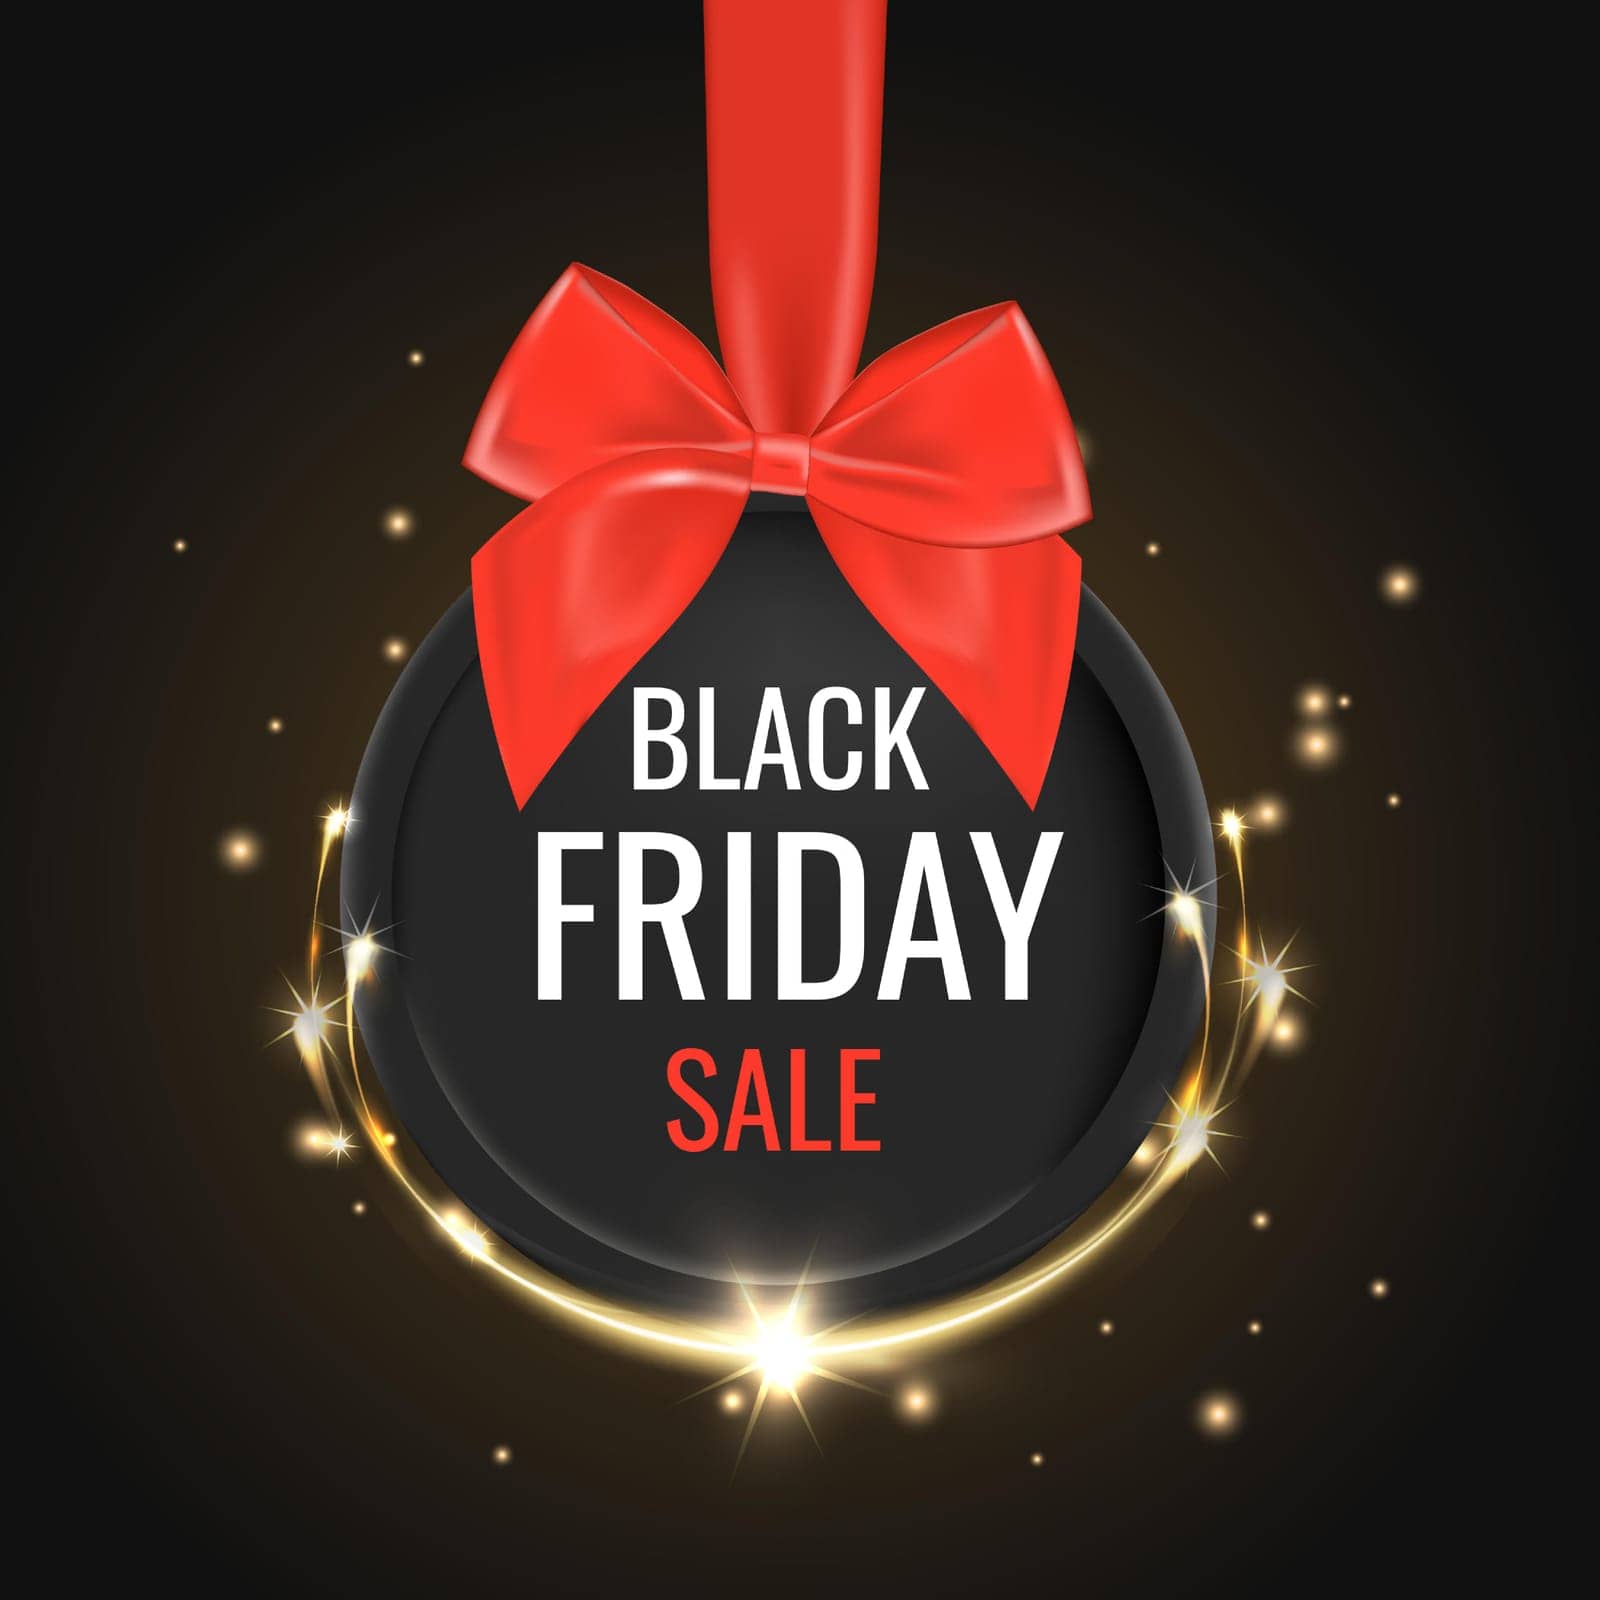 Black Friday sale black tag, round banner, Copy space for text advertising. vector illustration.